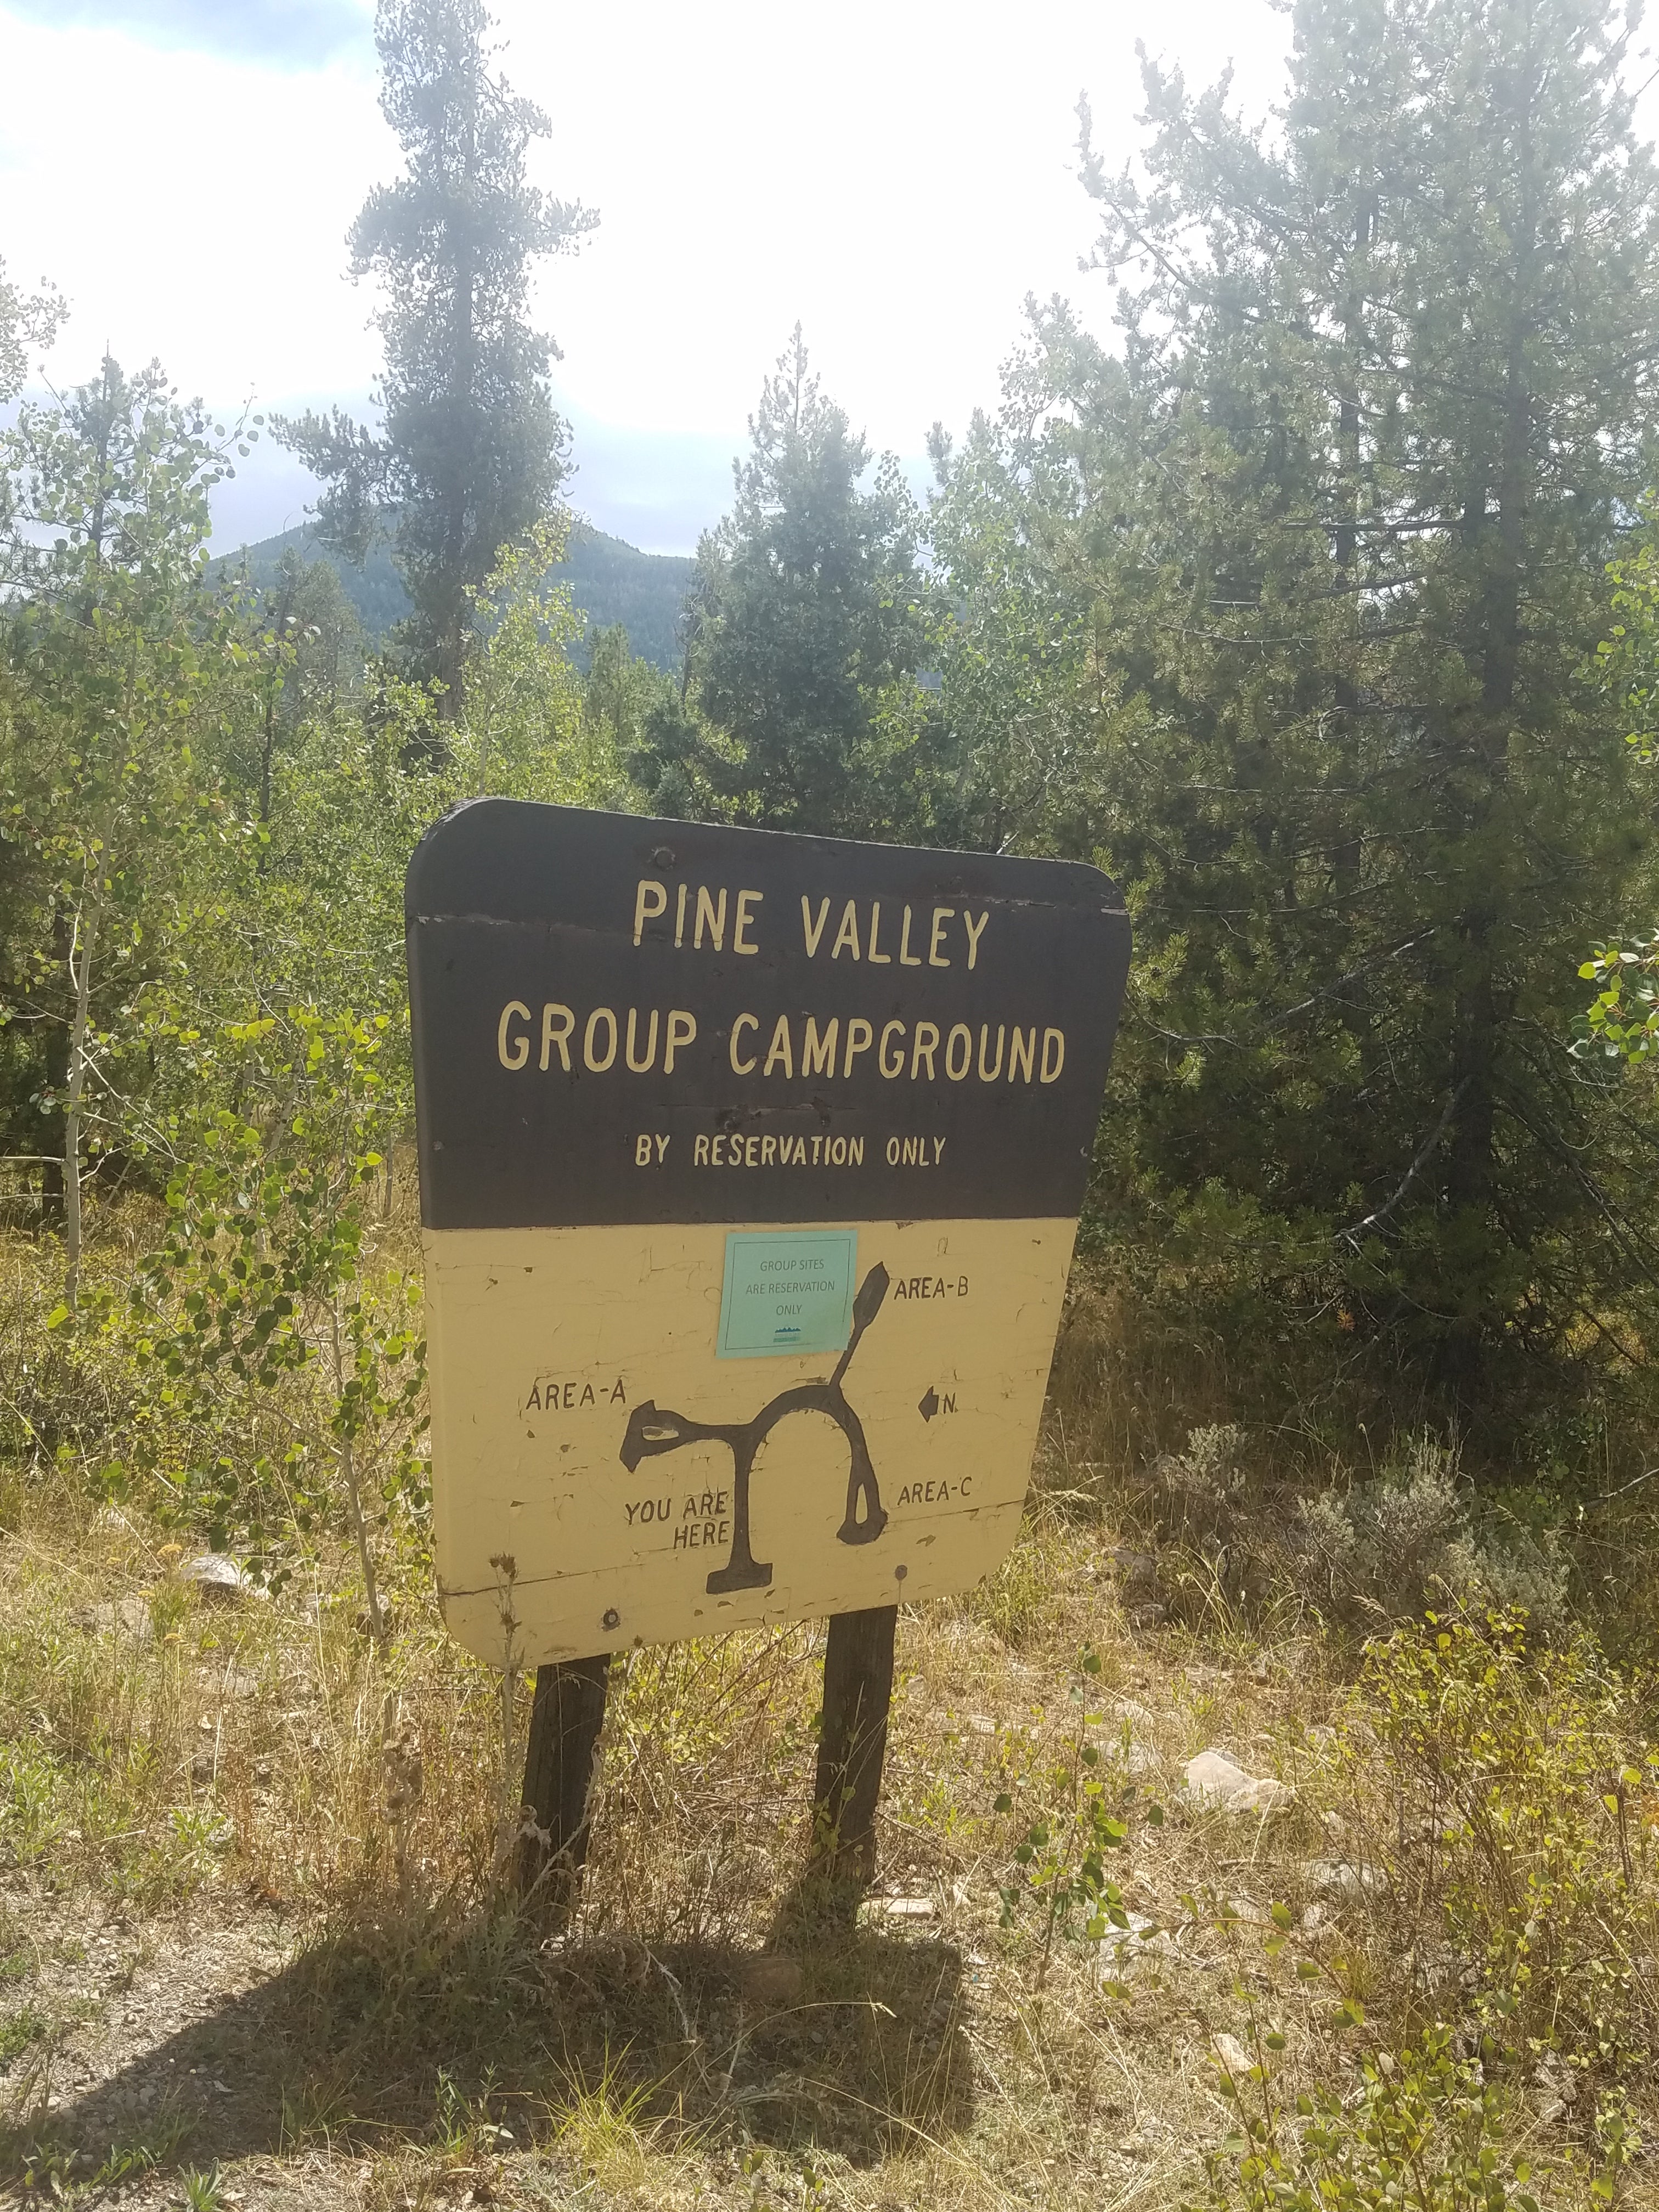 Camper submitted image from Pine Valley North Wasatch Cach - 4